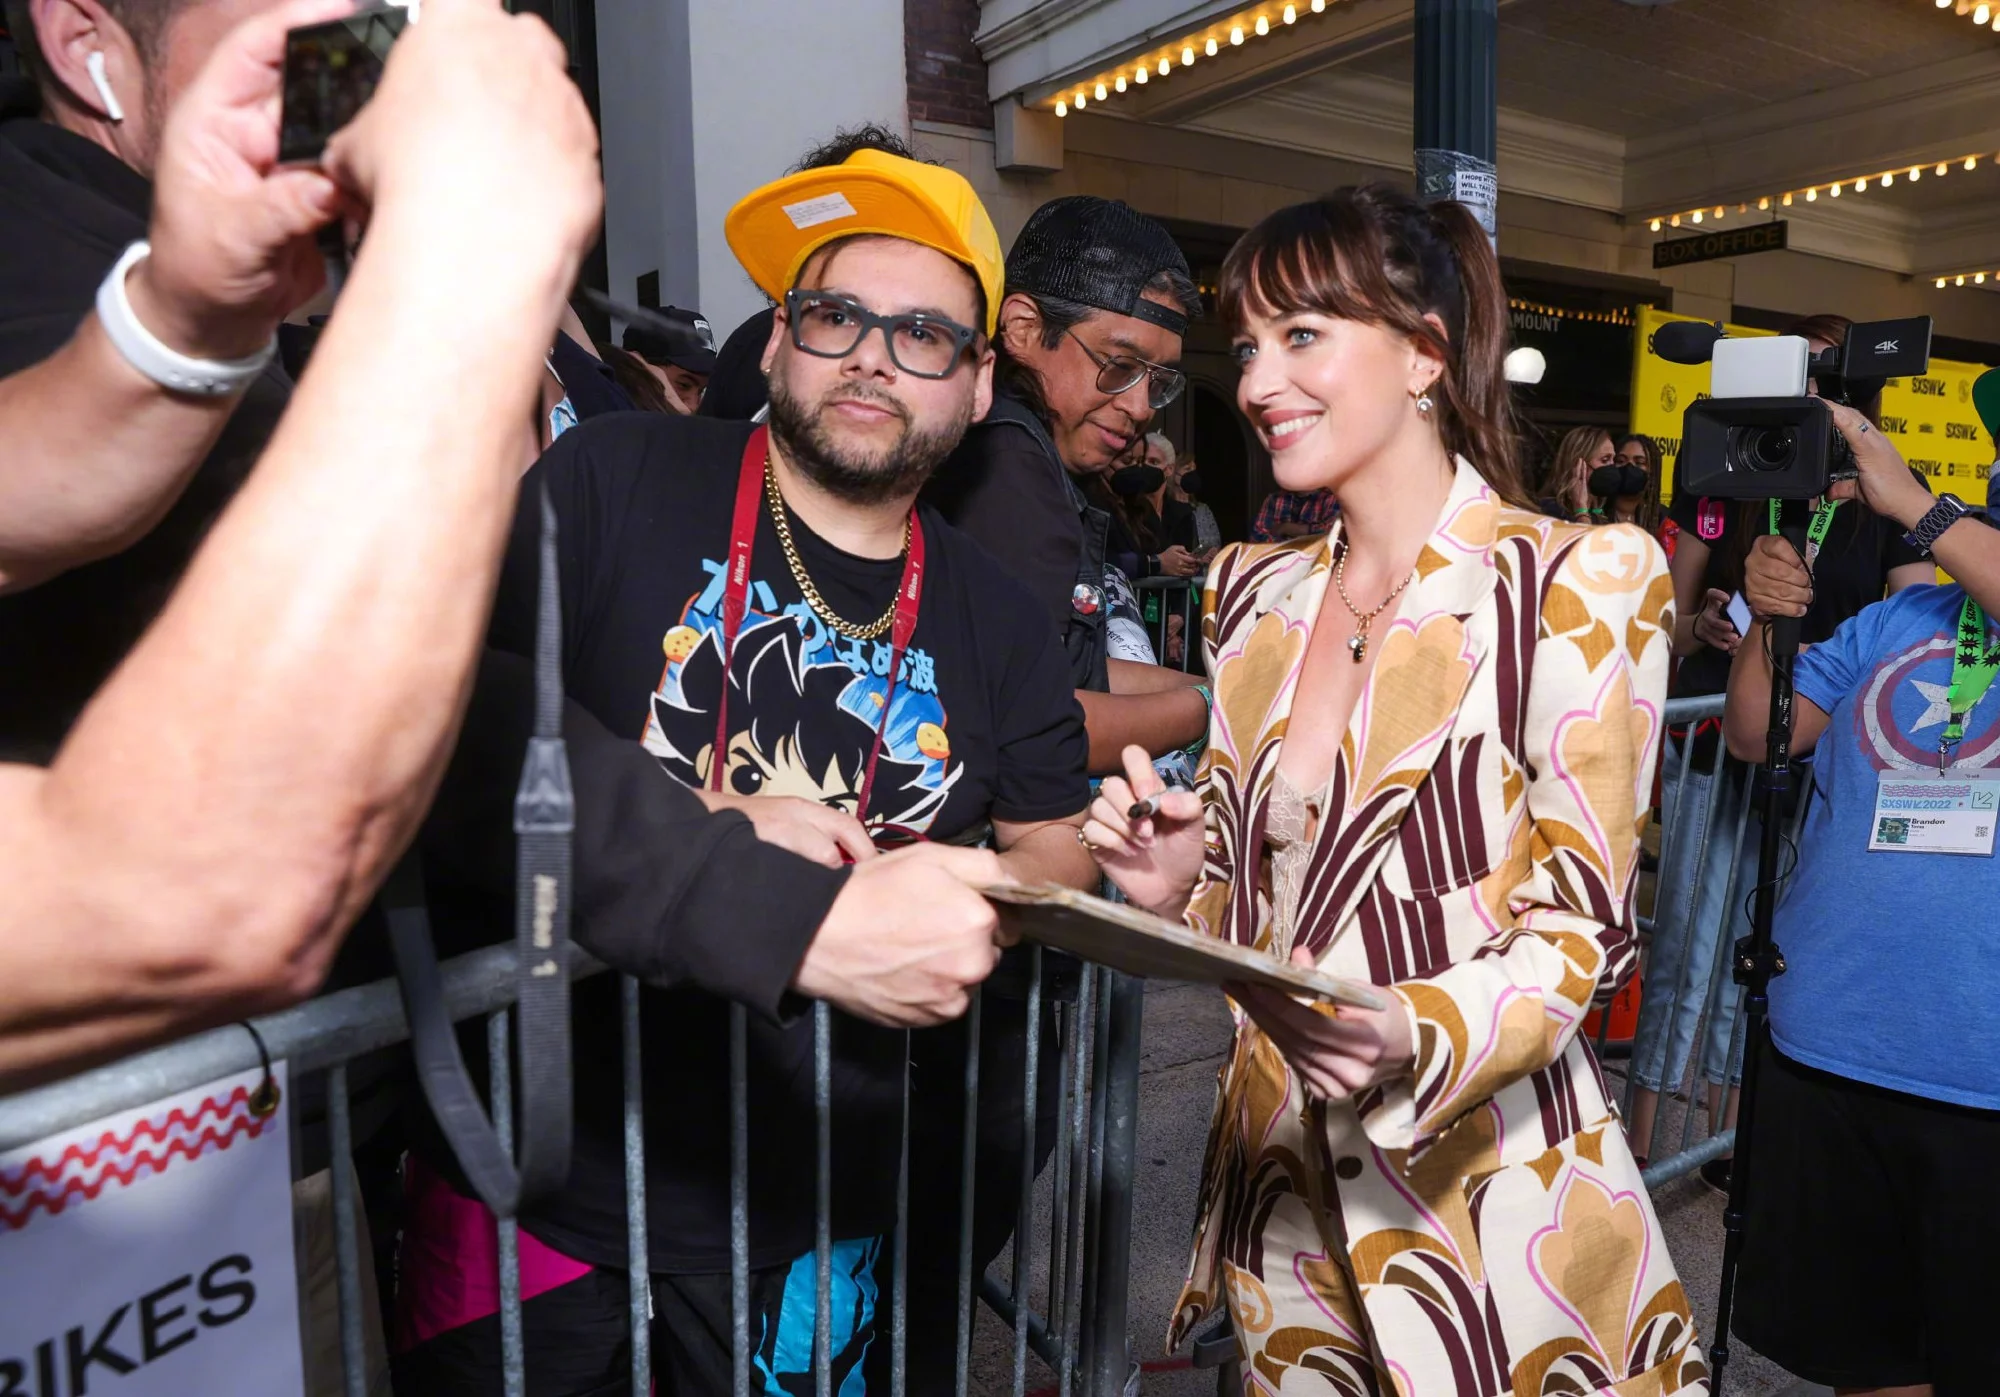 Dakota Johnson at the premiere of her new film "Cha Cha Real Smooth" at the South by Southwest Film Festival​​​